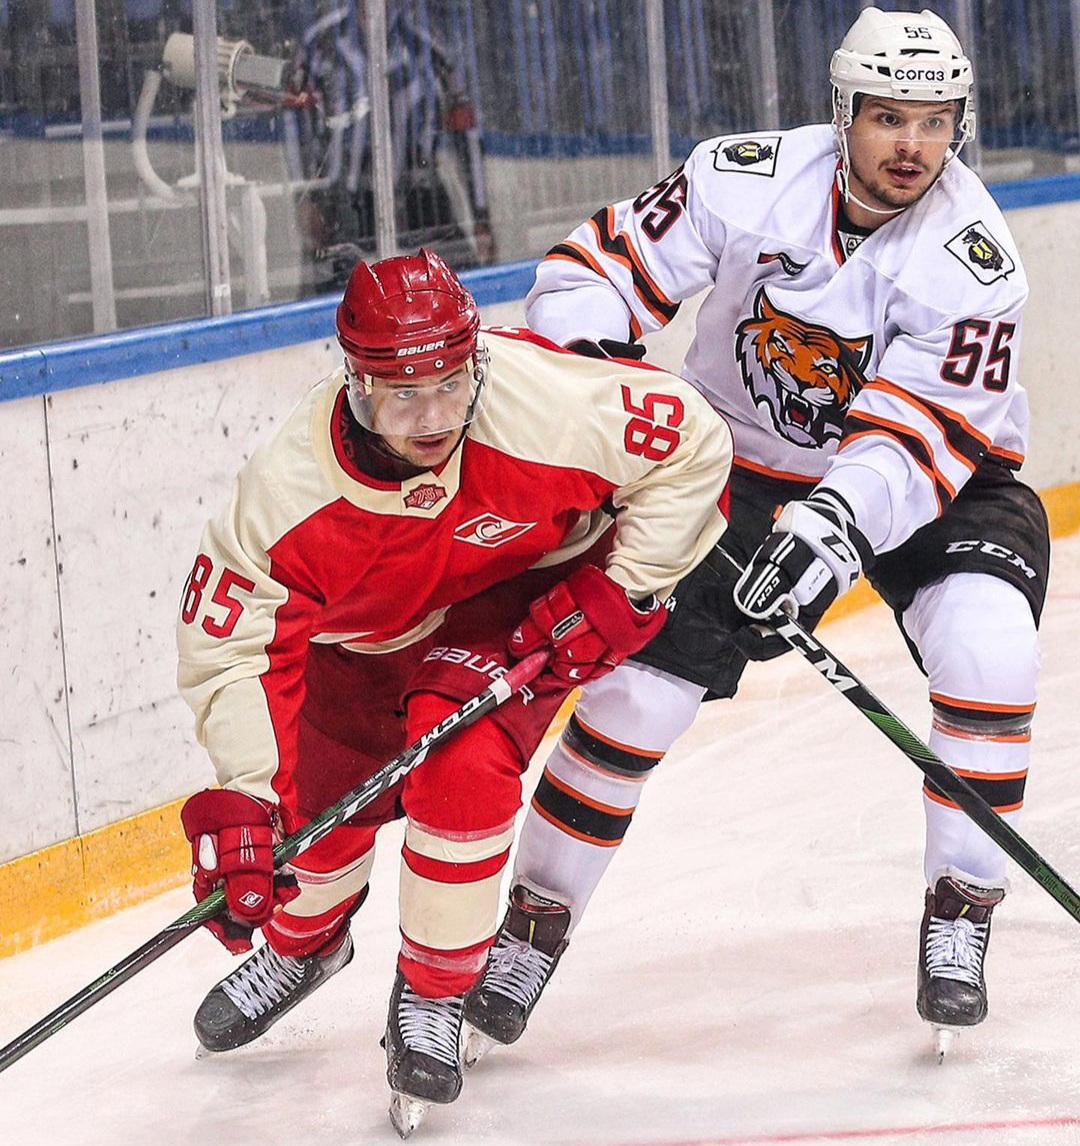 Spartak - Torpedo: forecast and bet on the KHL match